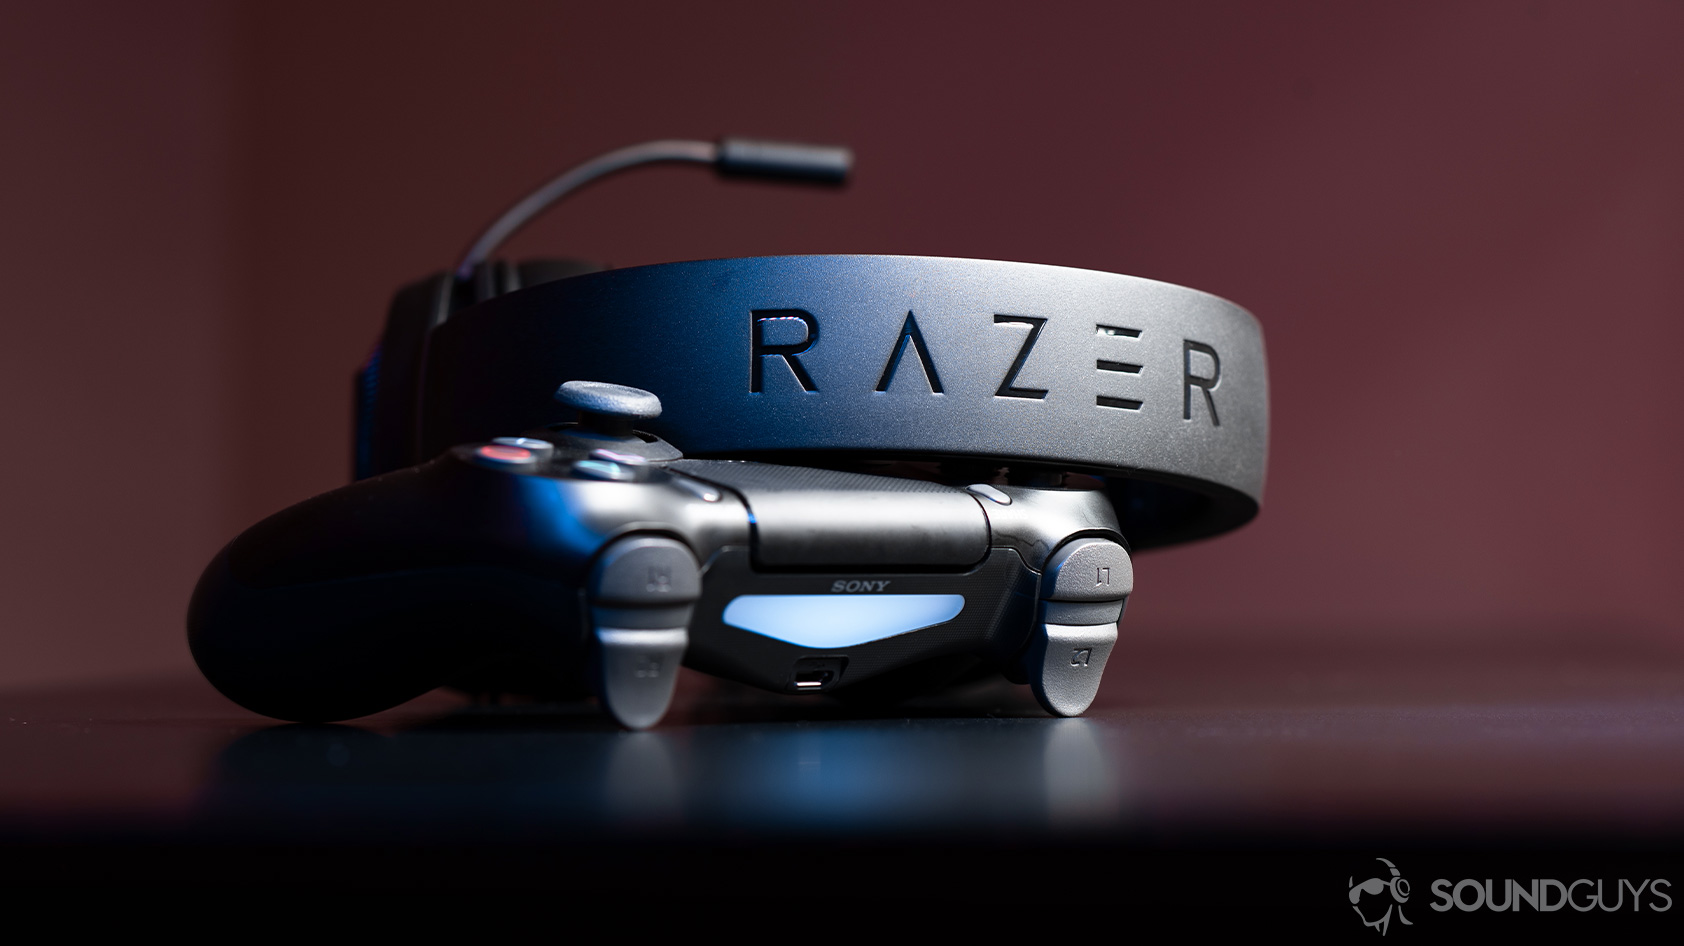 The Razer Kraken cheap gaming headset leaning against a PS4 controller with the headband facing the lens to show the Razer logo.